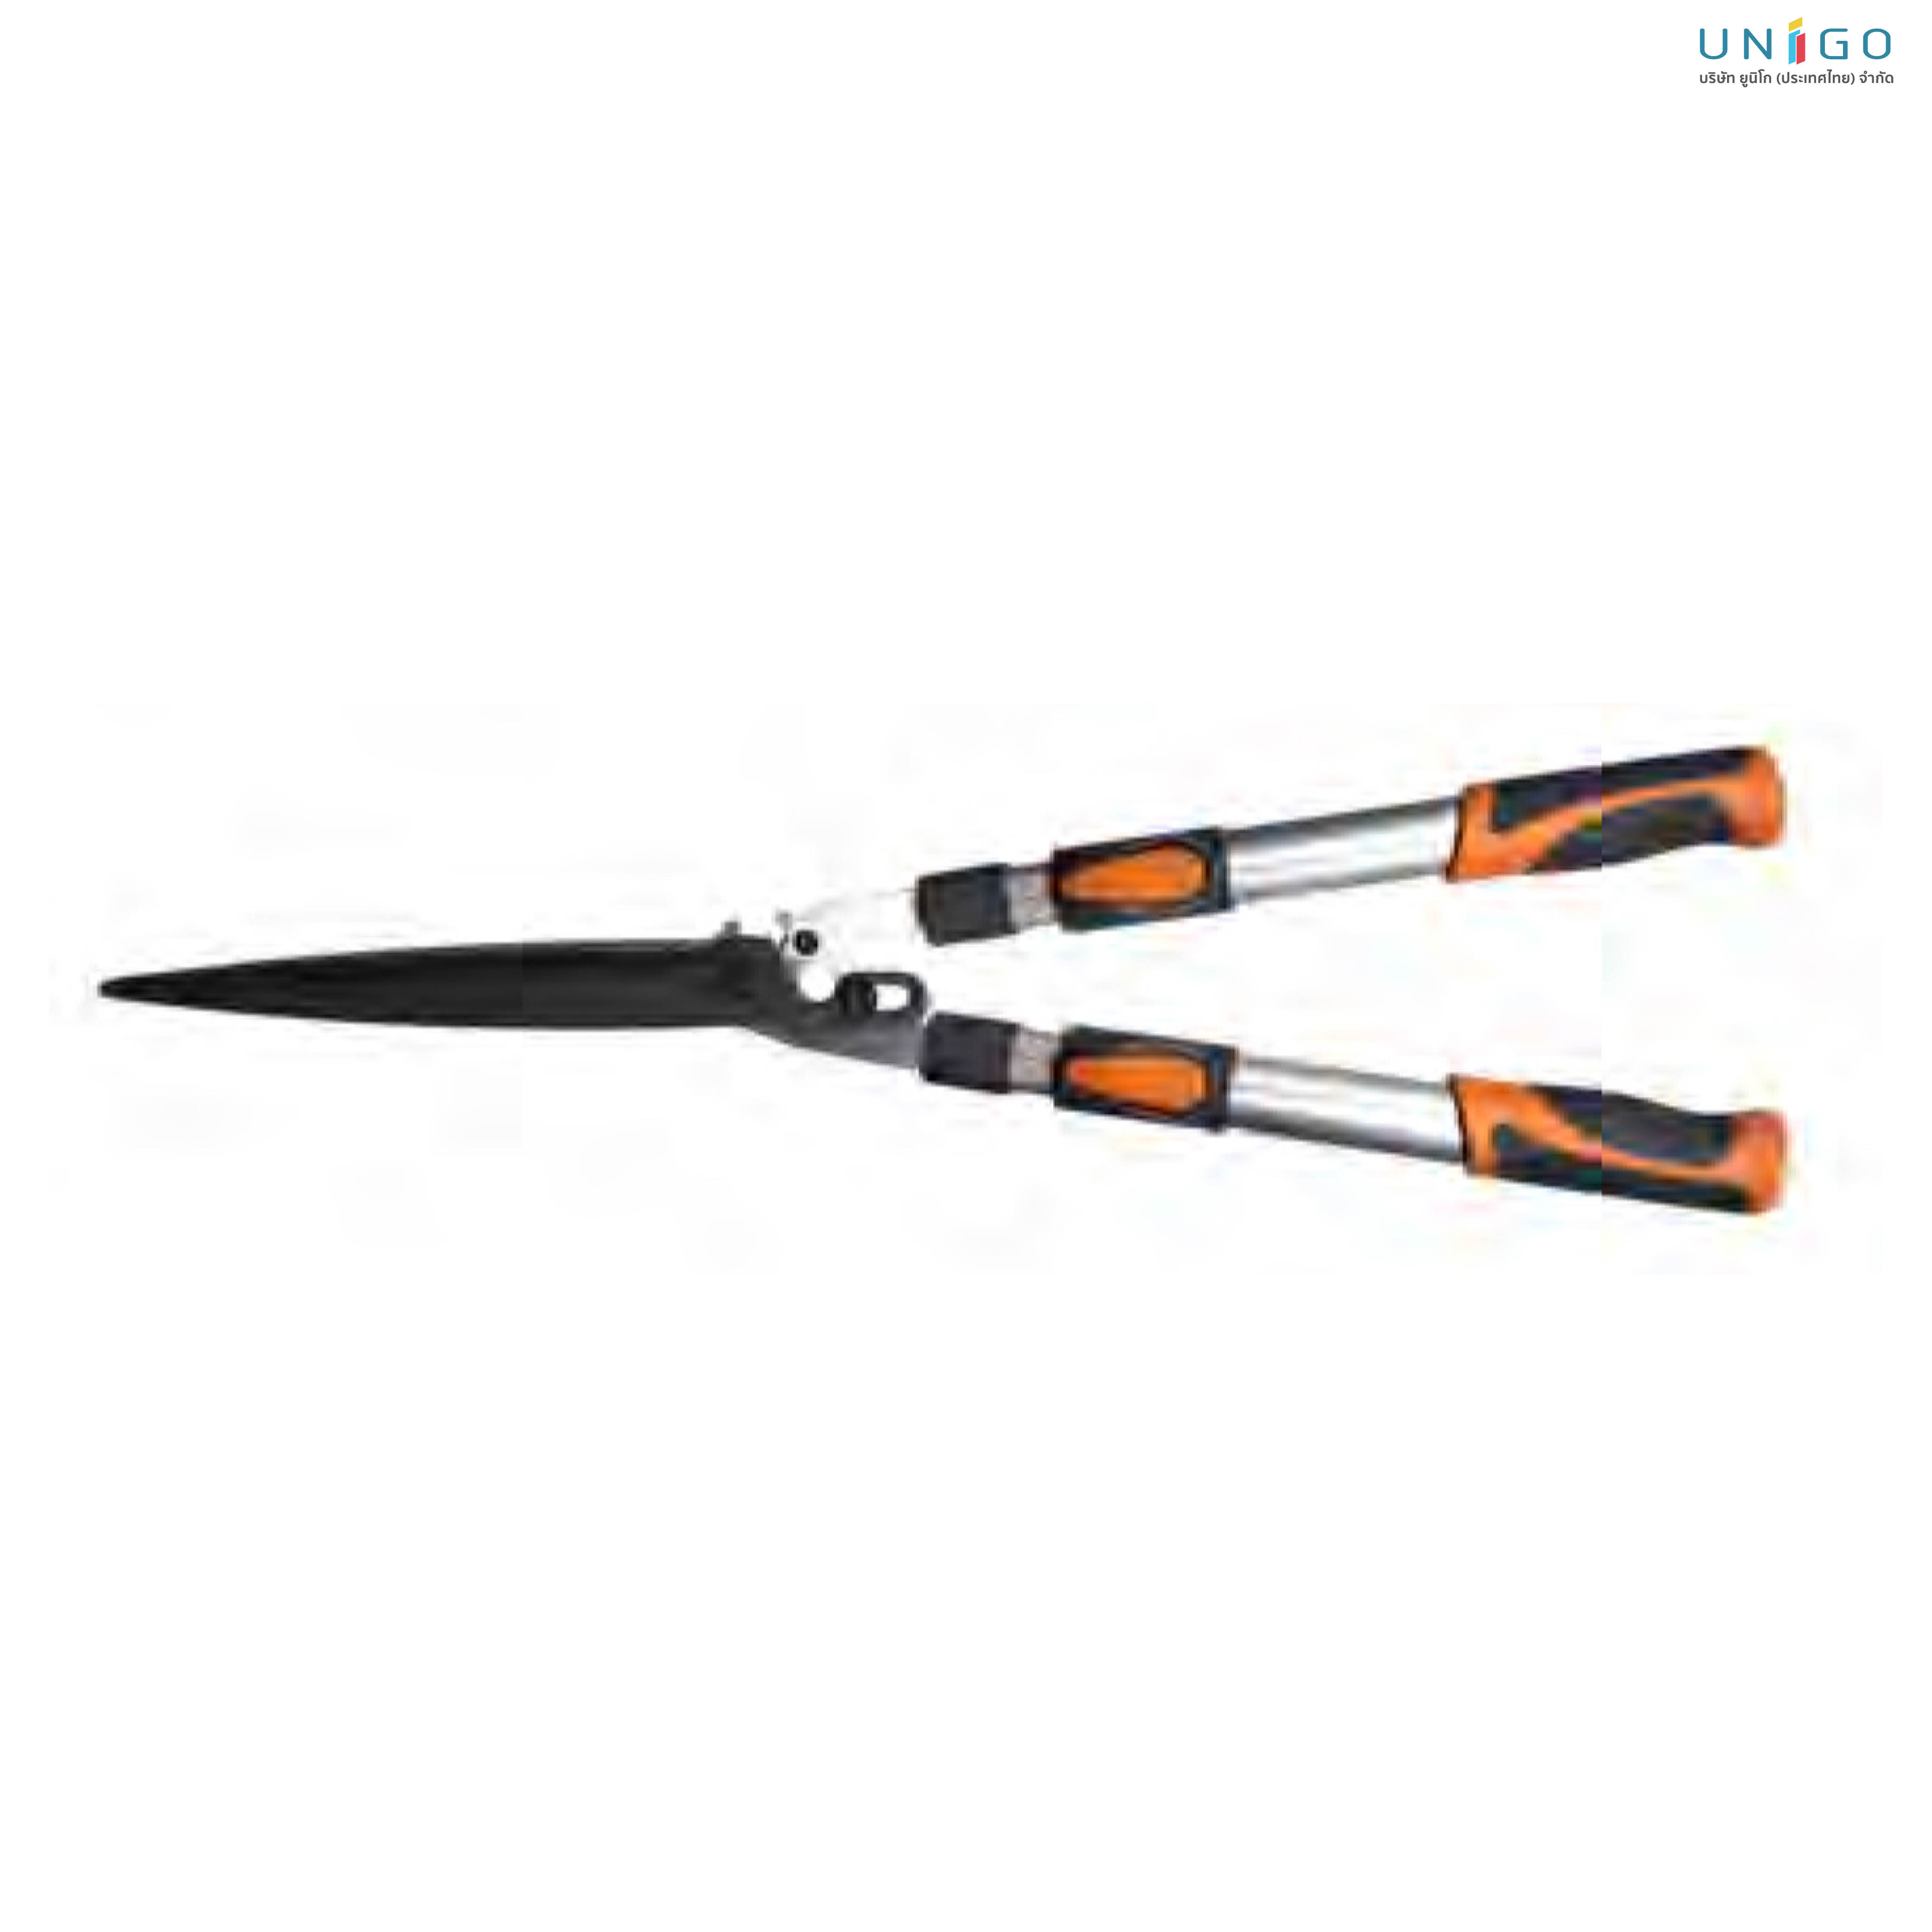 TELESCOPIC GEAR ACTION STRAIGHT BLADE HEDGE SHEARS